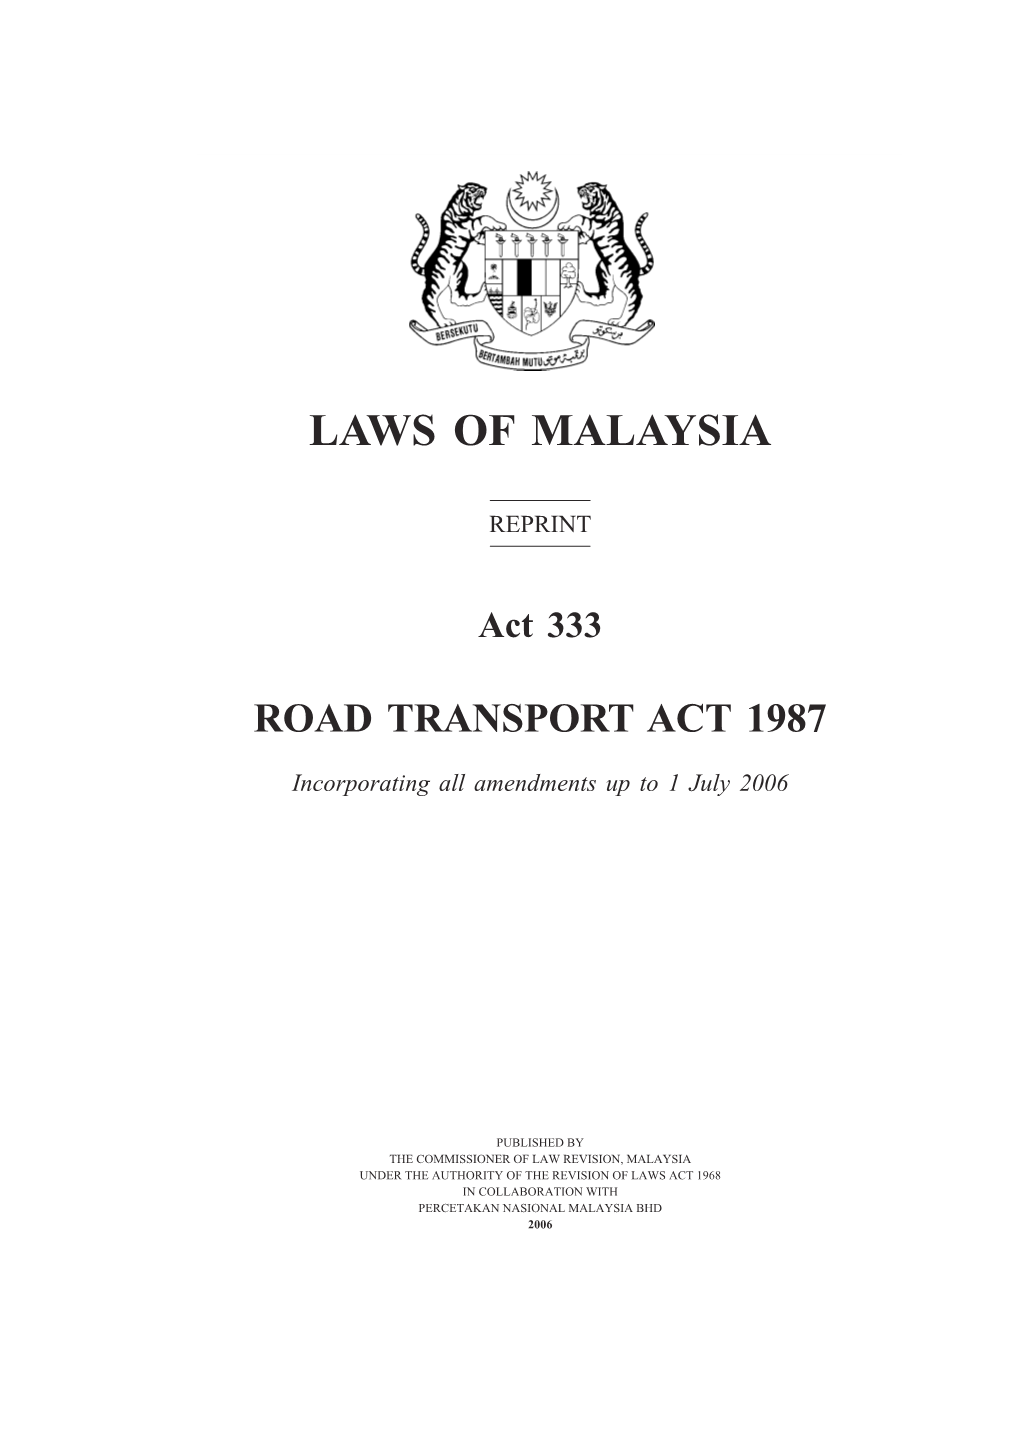 Road Transport Act 1987